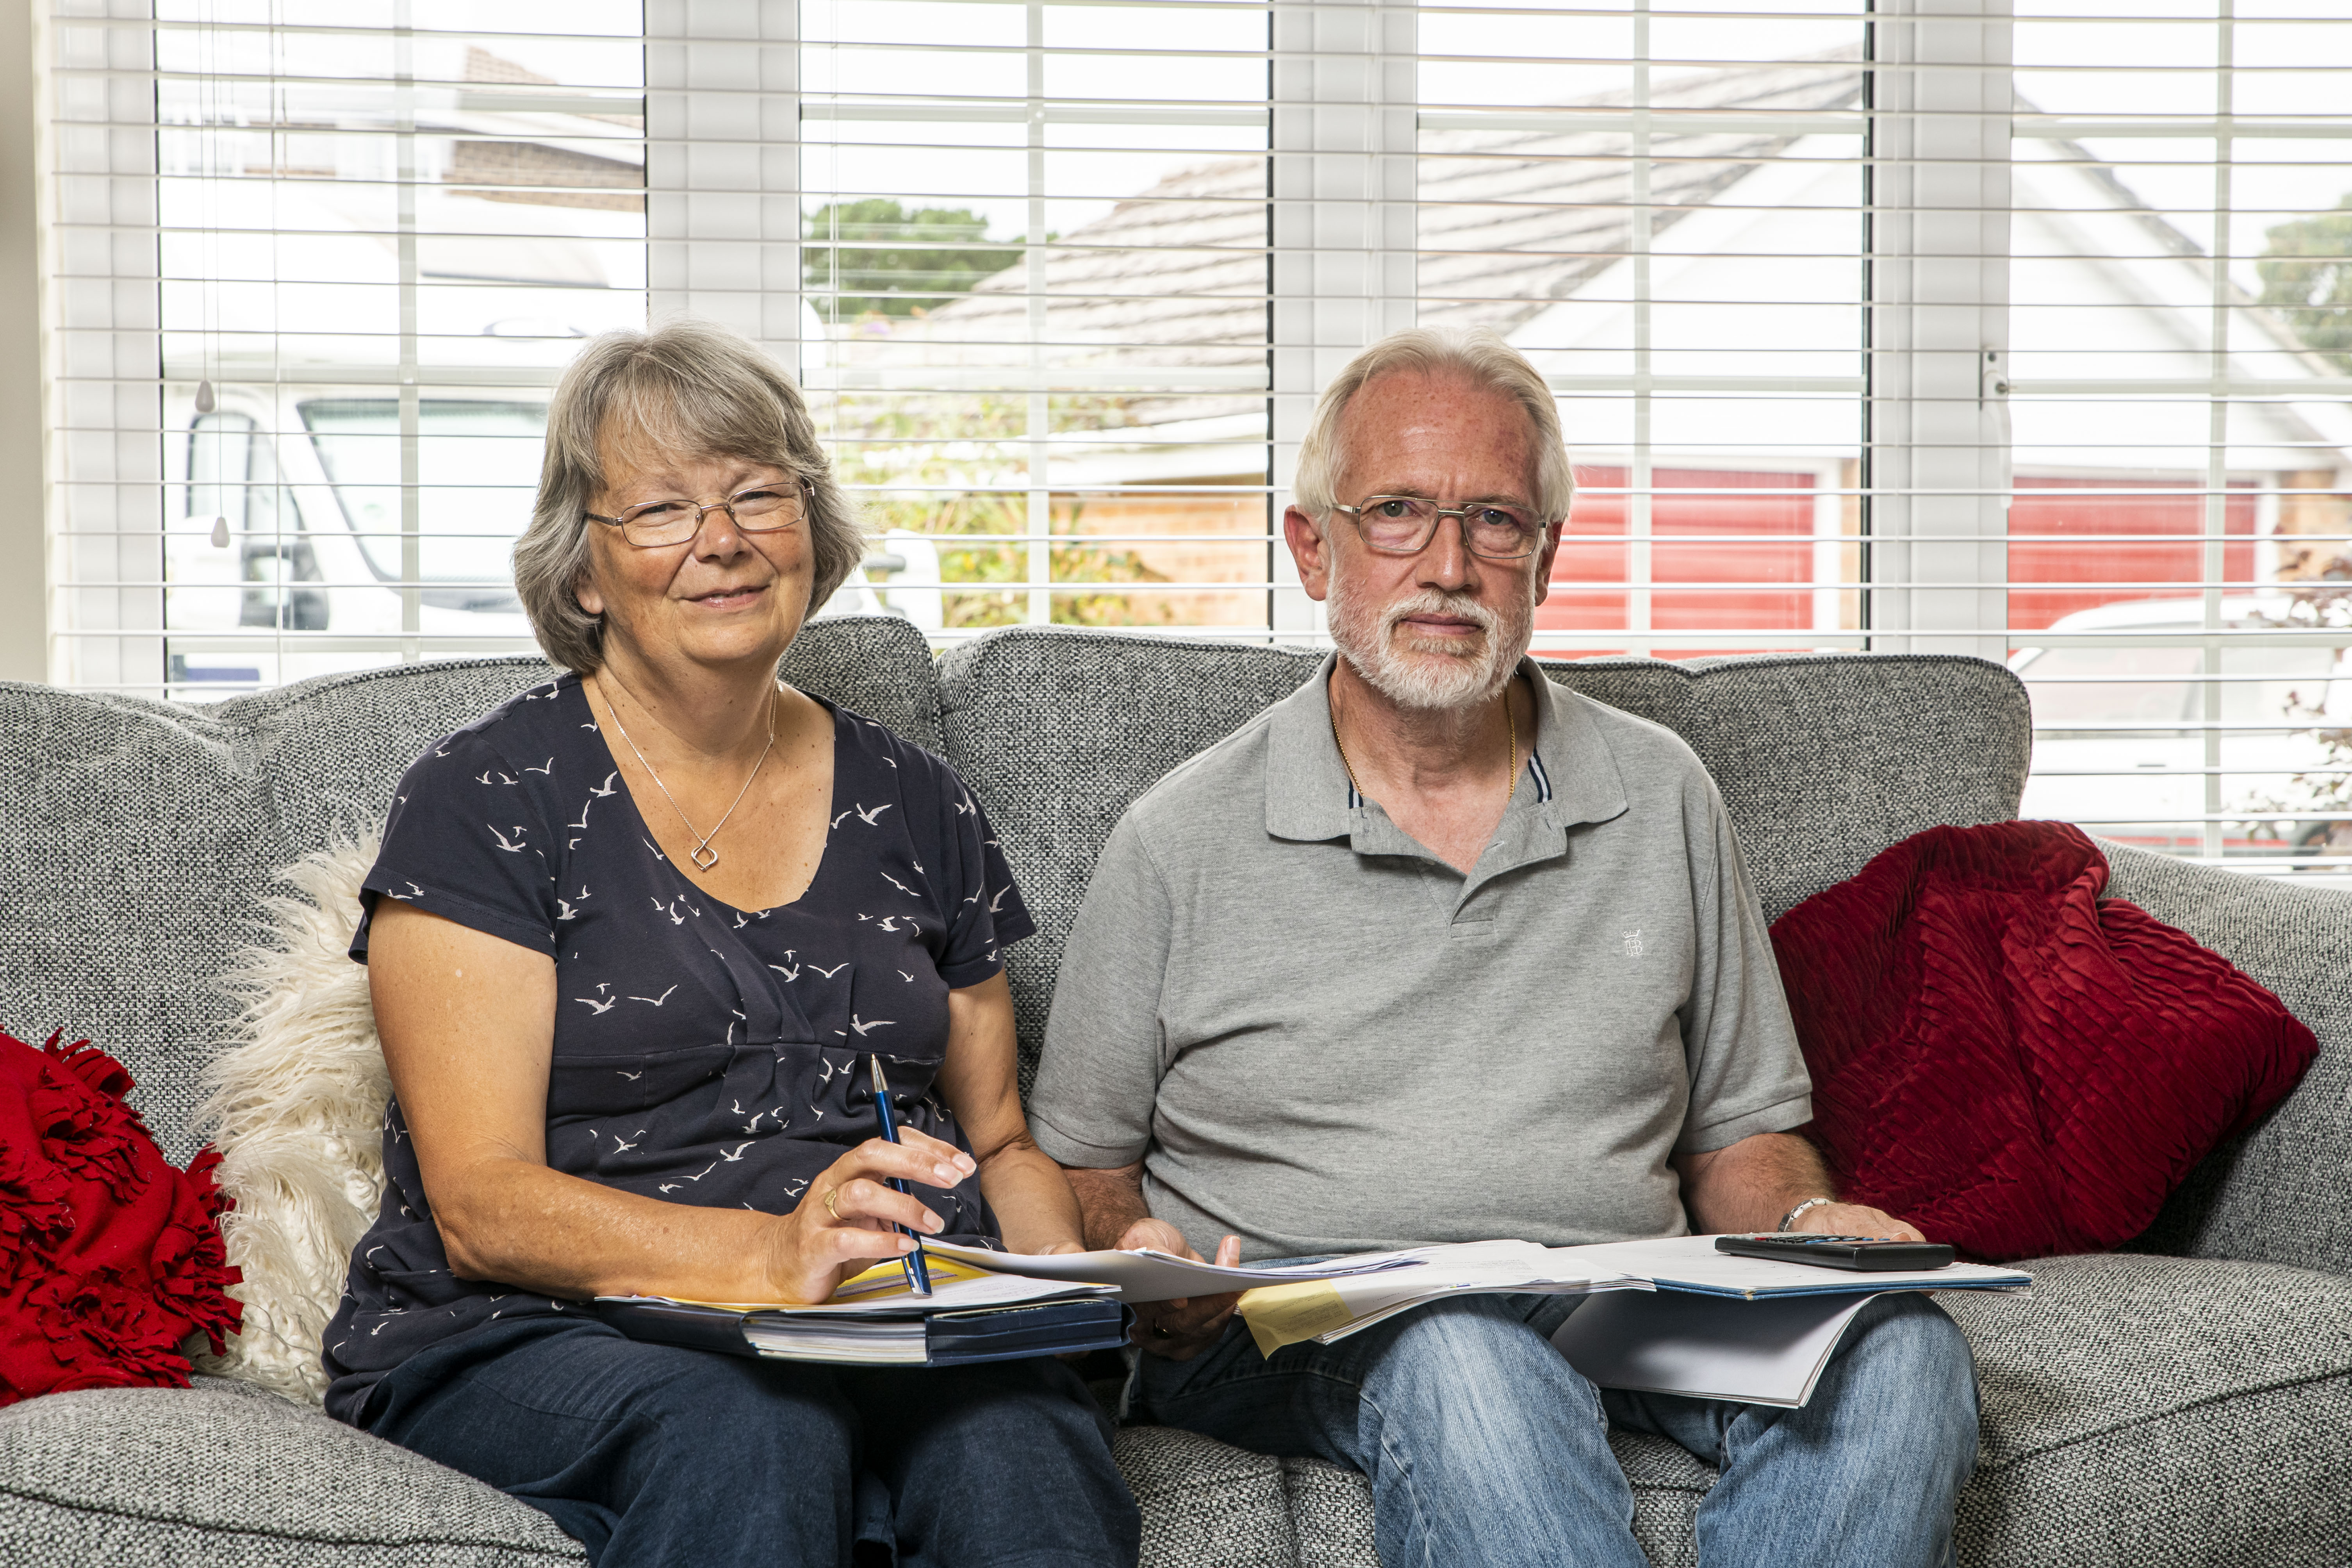 They made the most of their workplace pension schemes to boost their savings